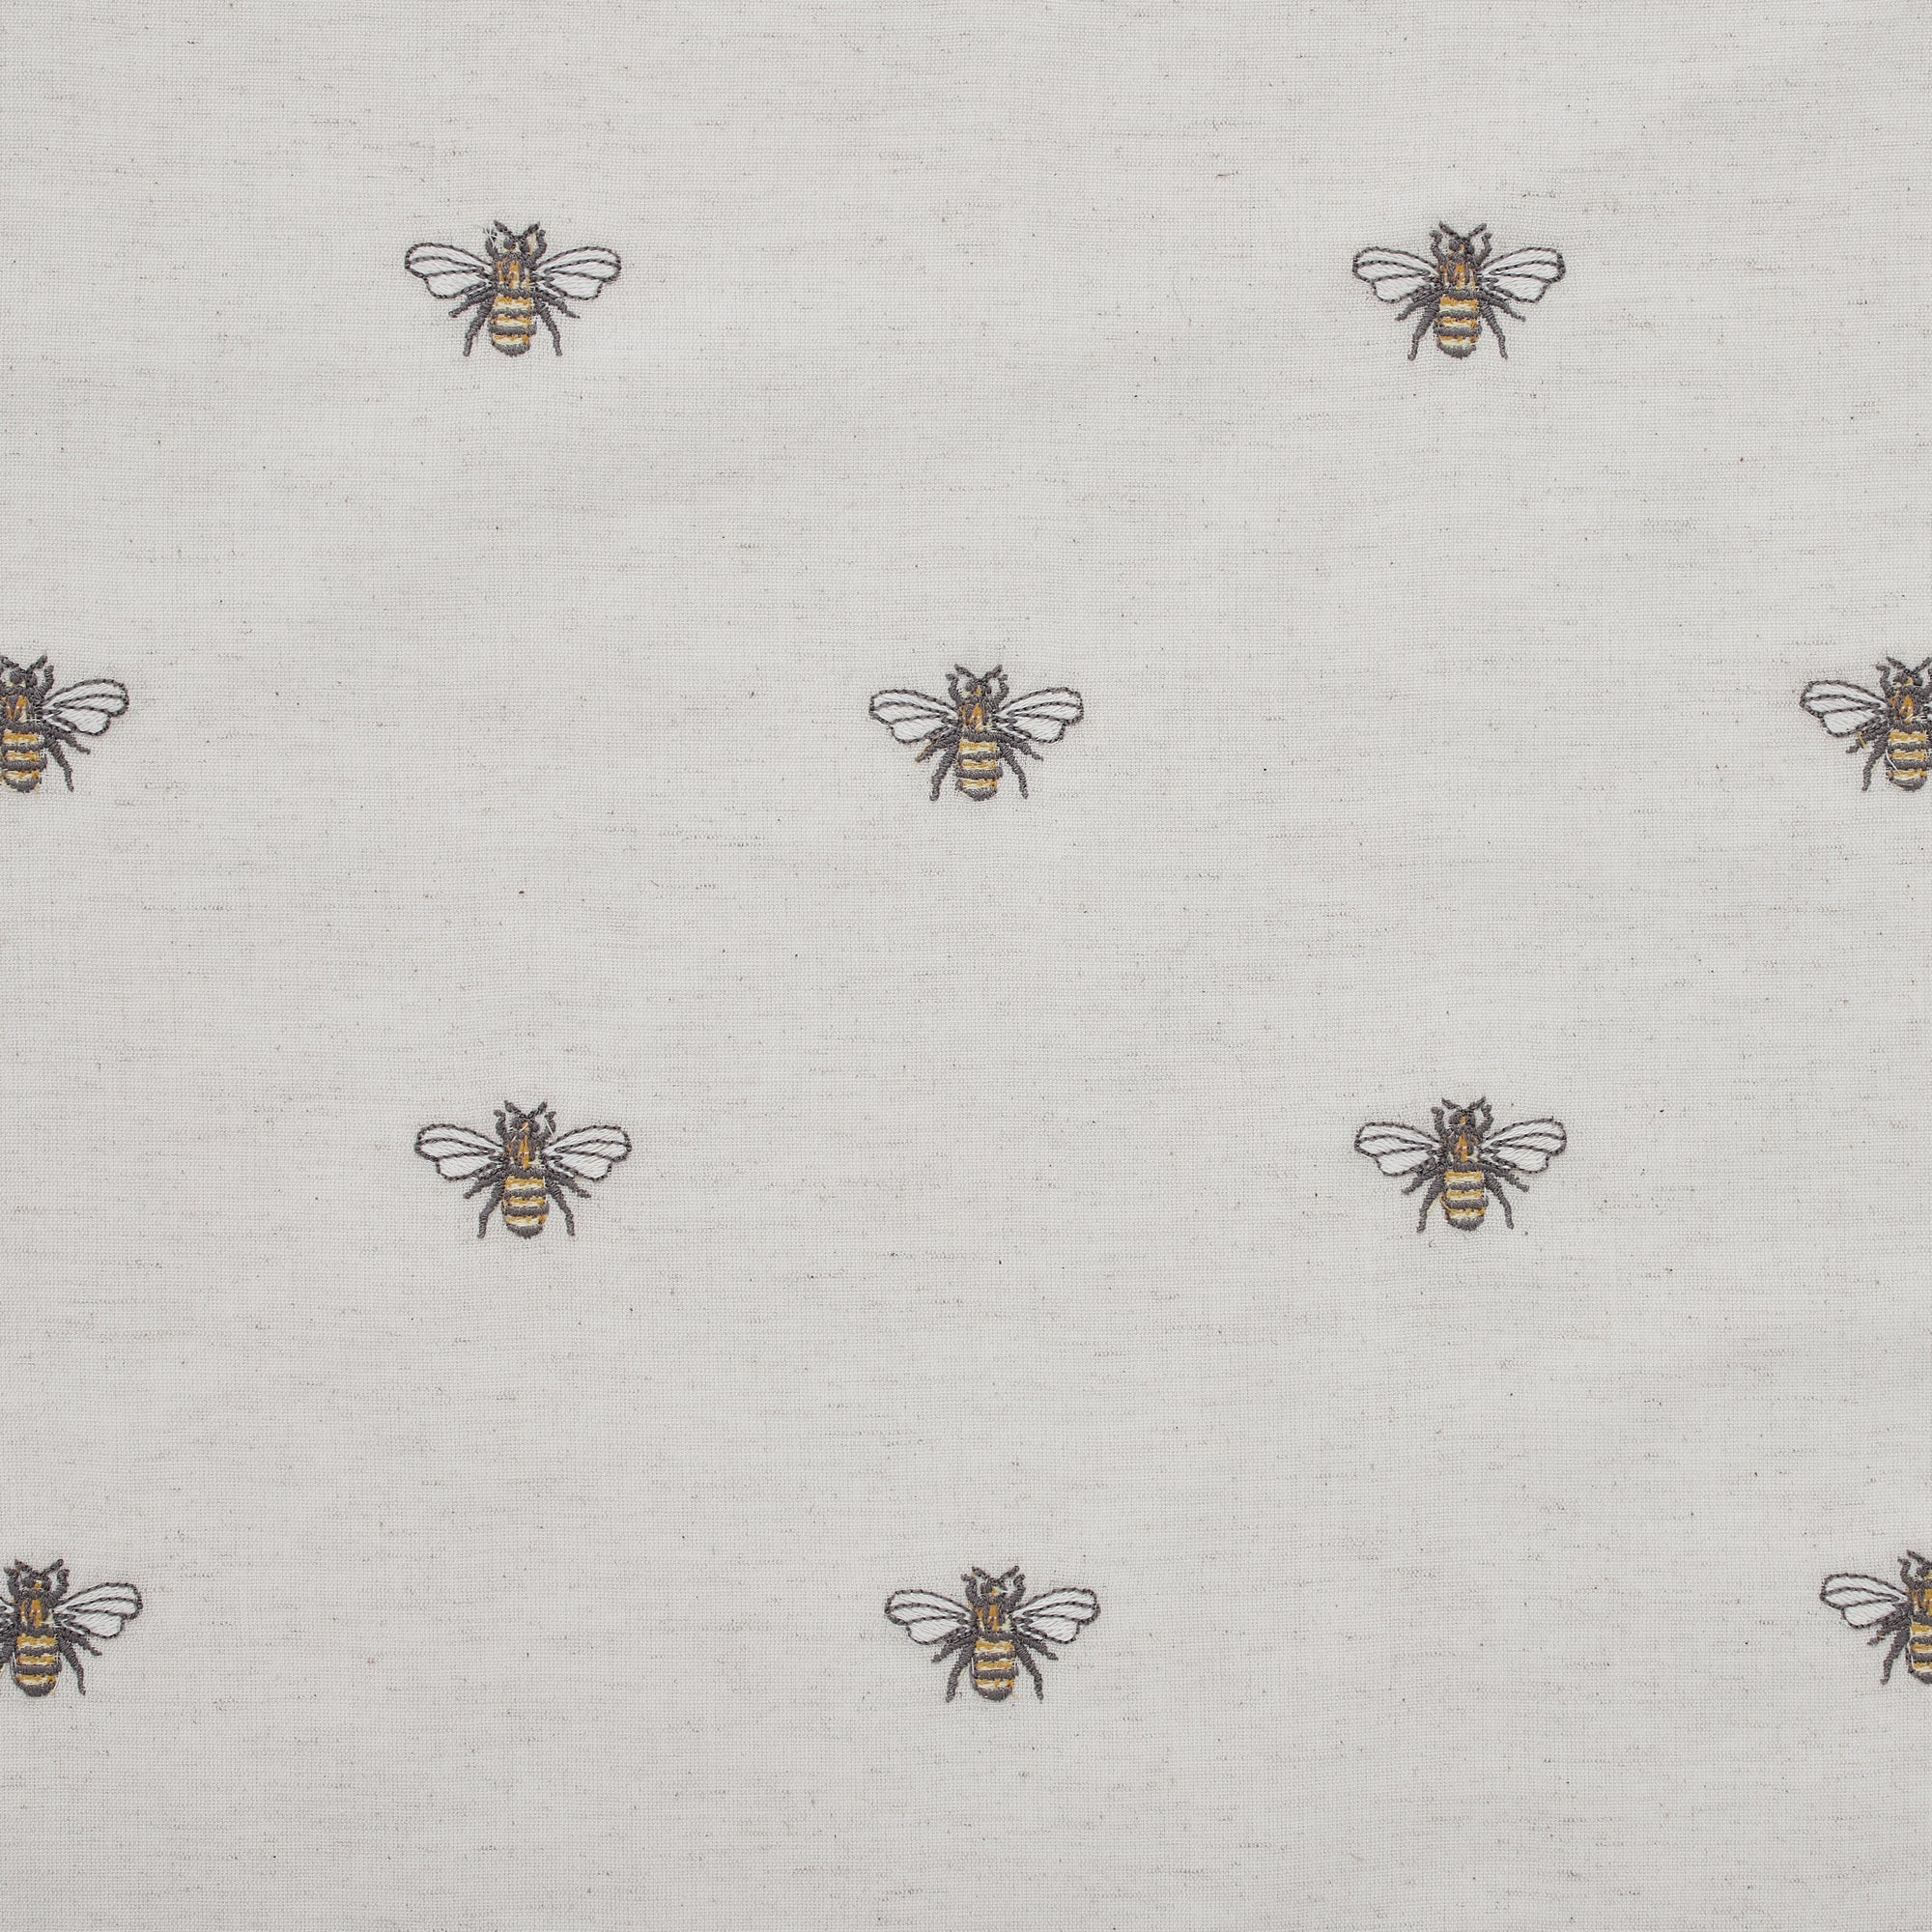 Embroidered Bee Placemat Set of 6 12x18 VHC Brands